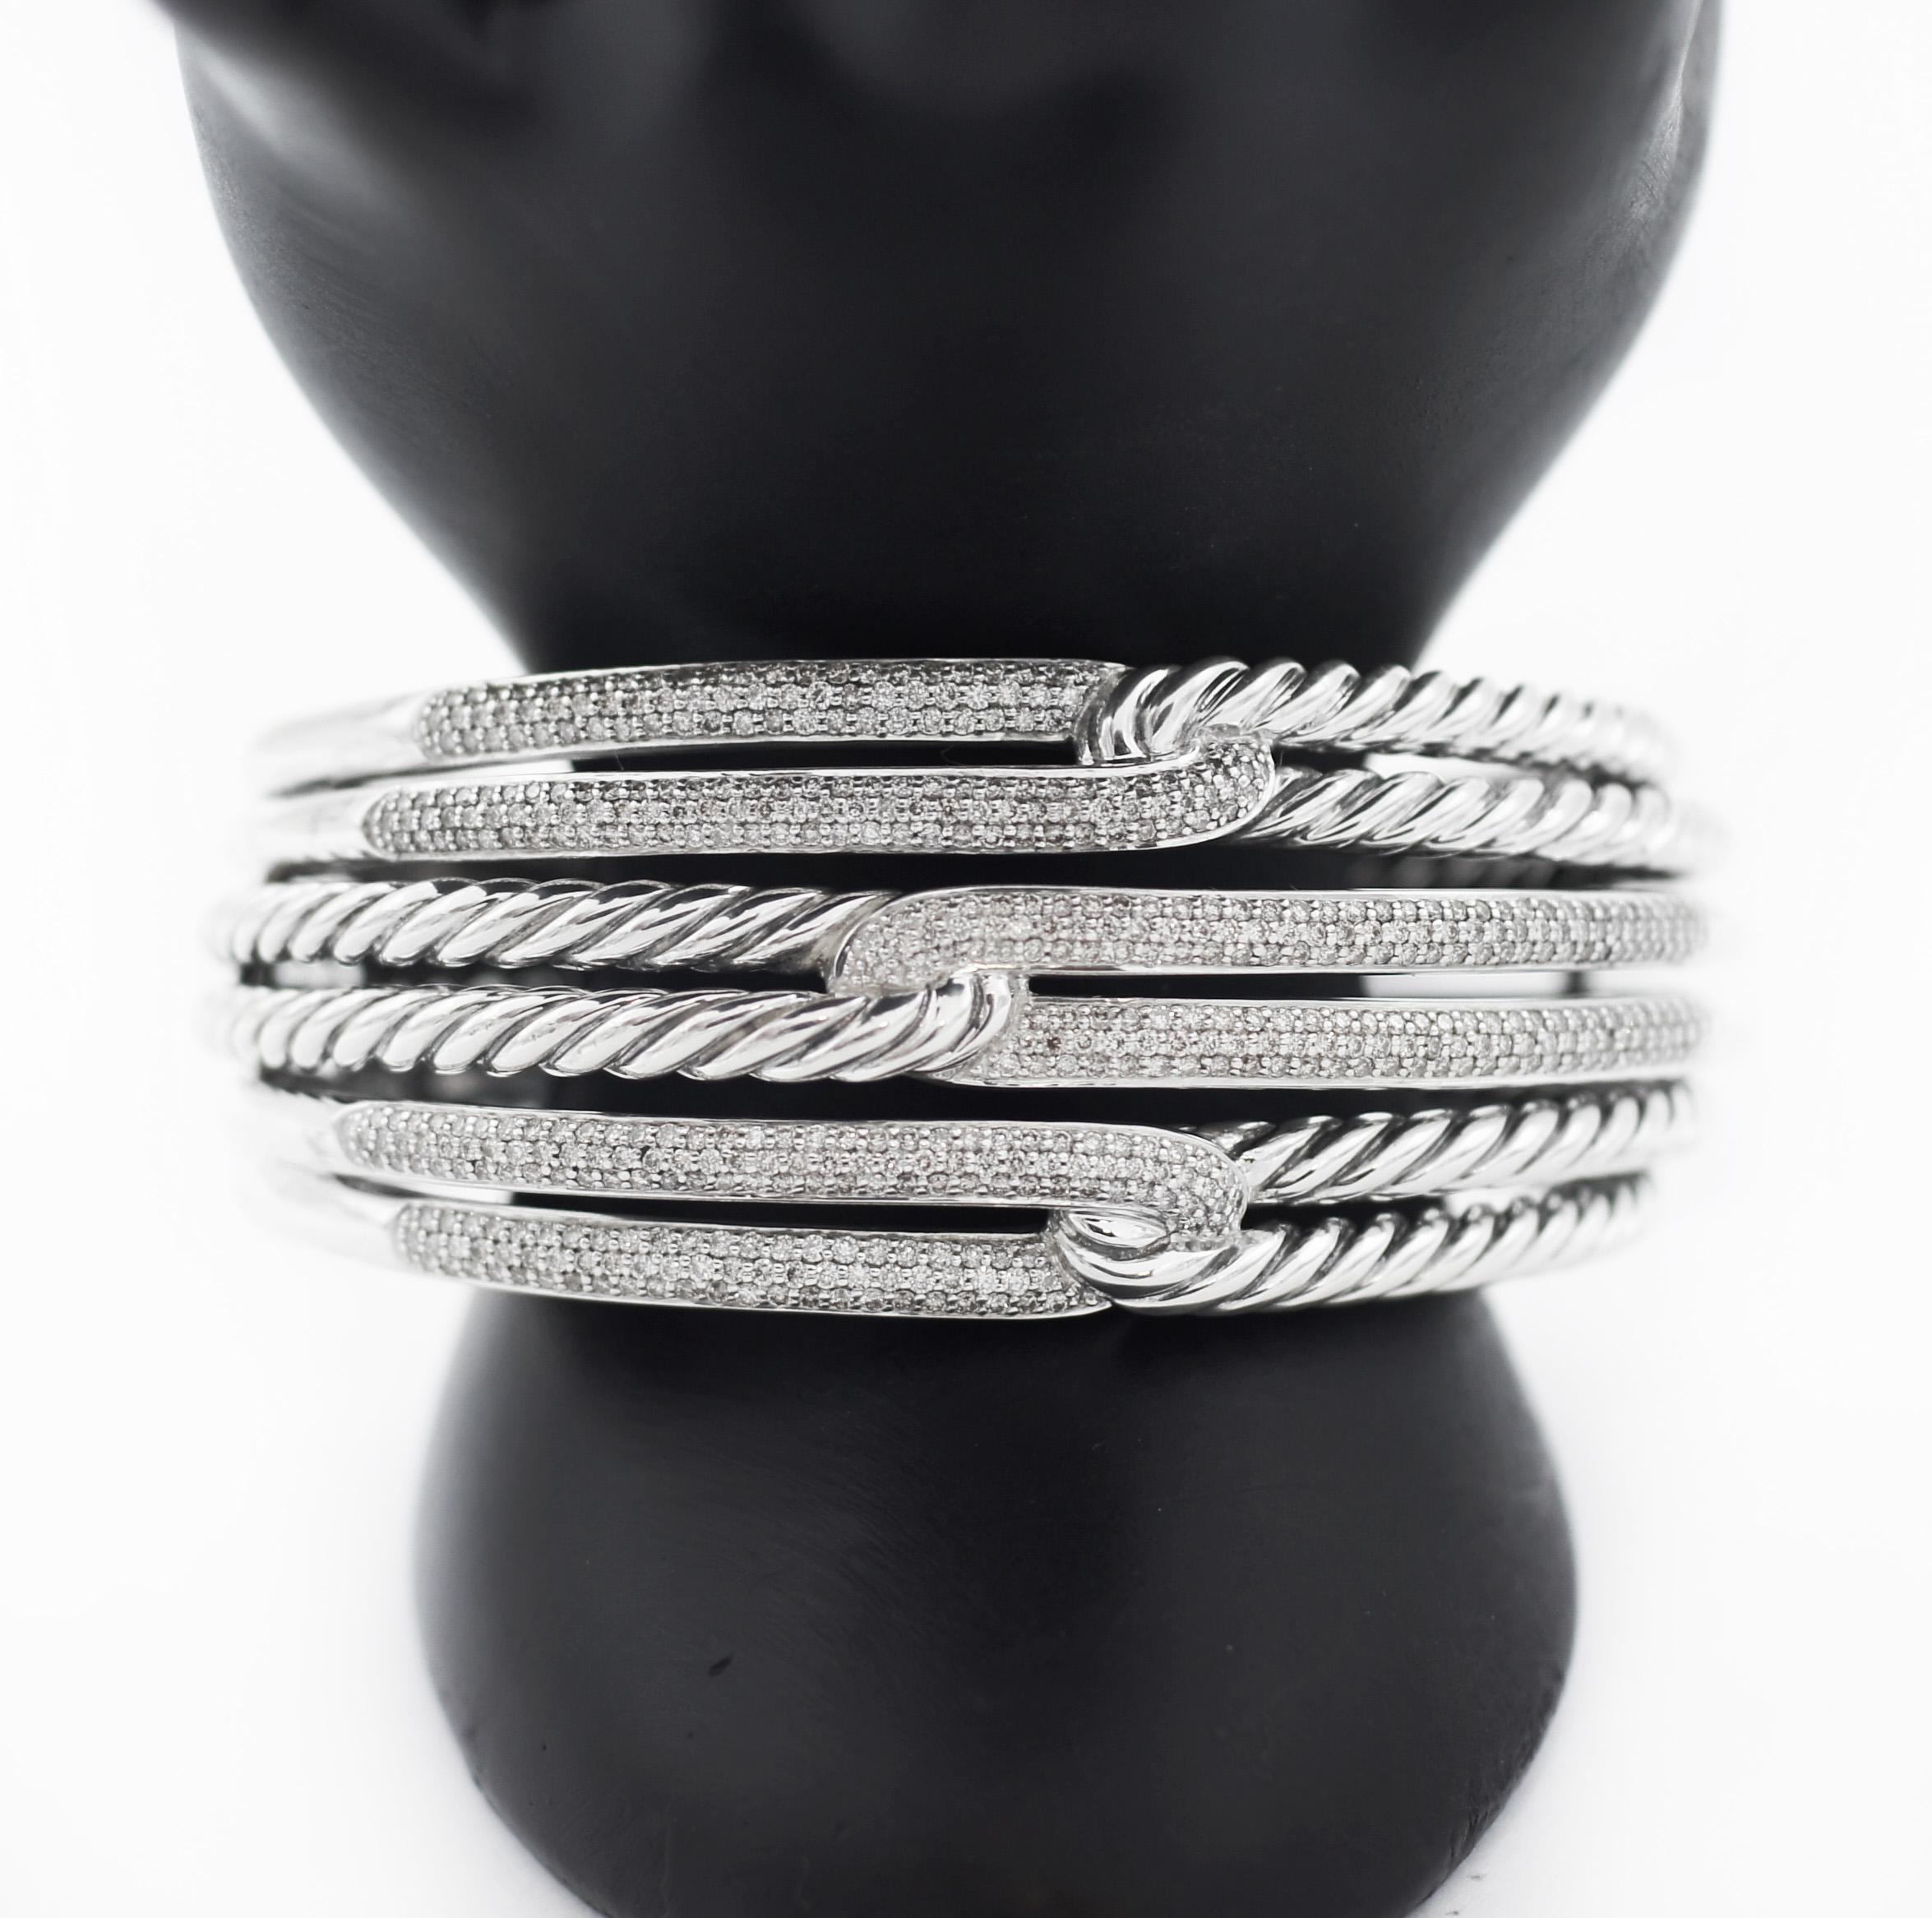 DAVID YURMAN
This exquisite designer bracelet is being offered here for a much more wallet-friendly price
Collection: Labyrinth
Metal Content: 925 Sterling Silver (bracelet) & Stainless Steel (hinges) as stamped
Stone Information: Natural